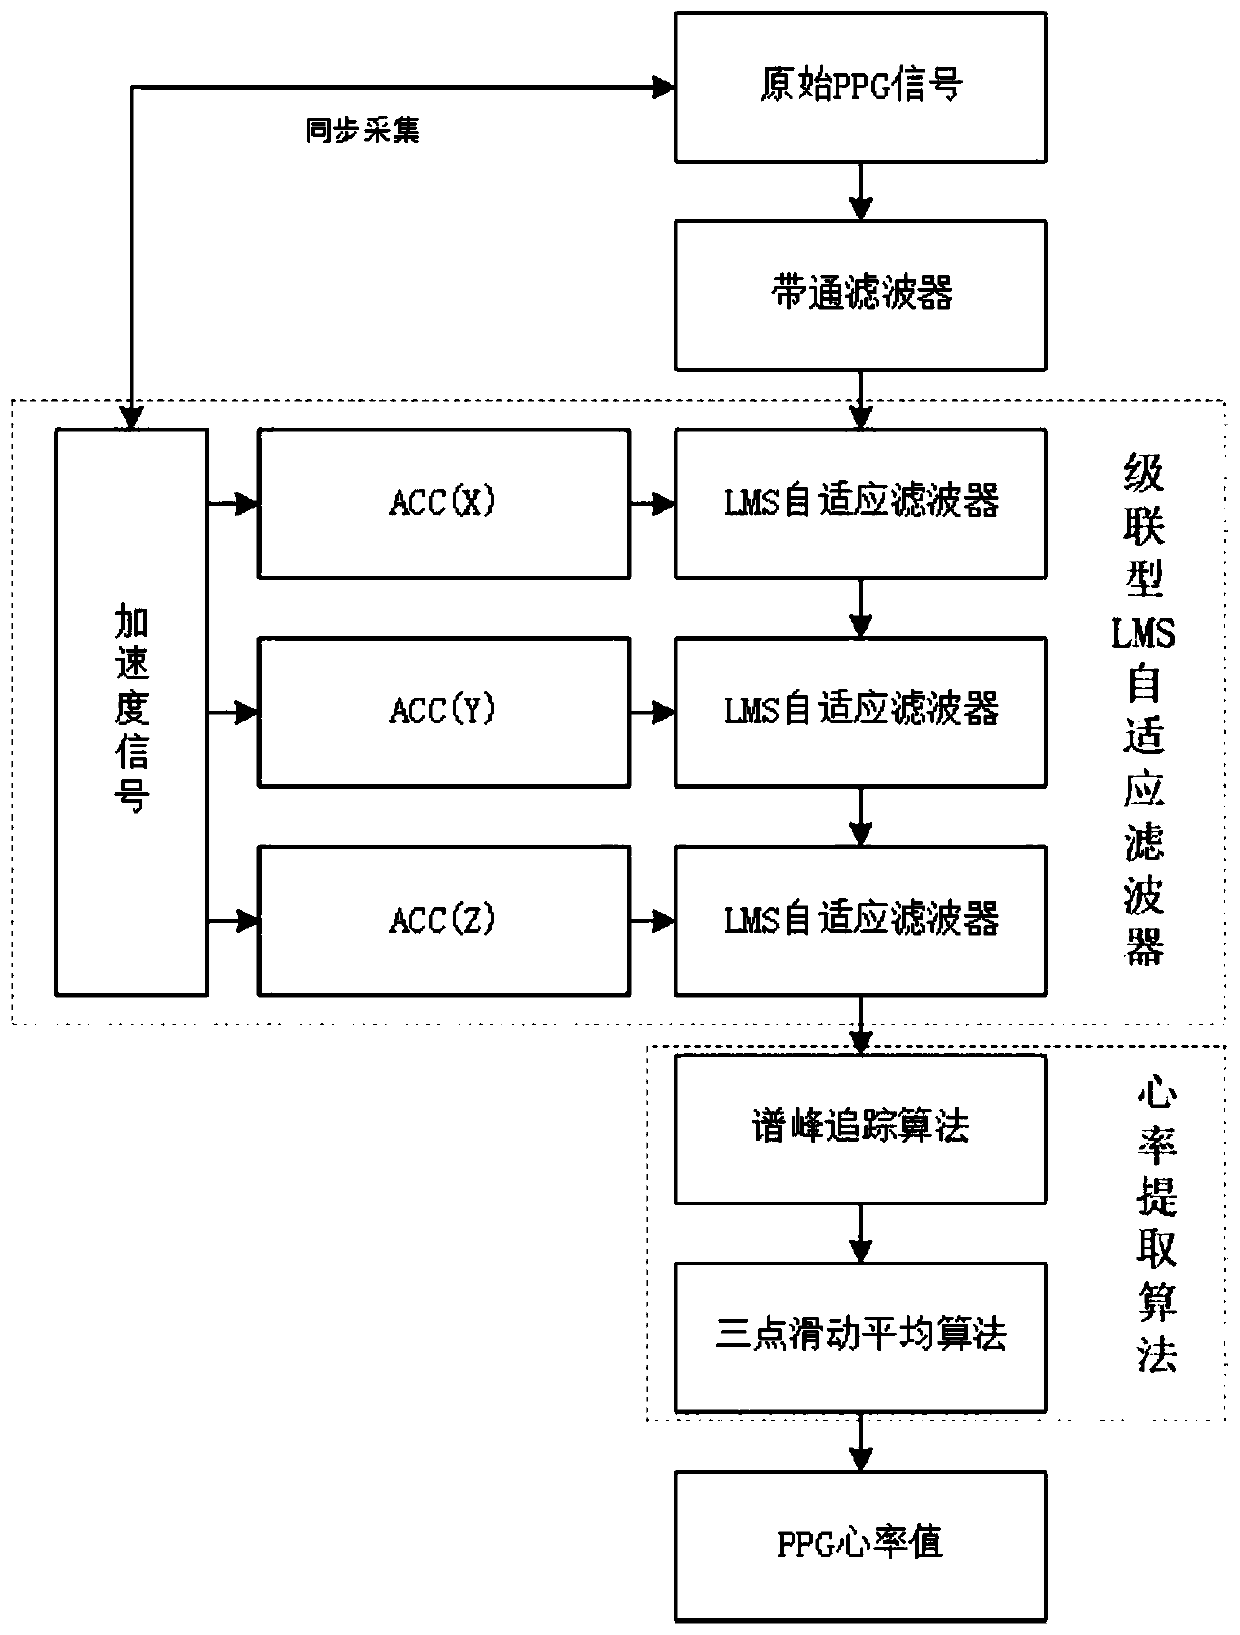 LMS adaptive filtering PPG signal heart rate extraction method